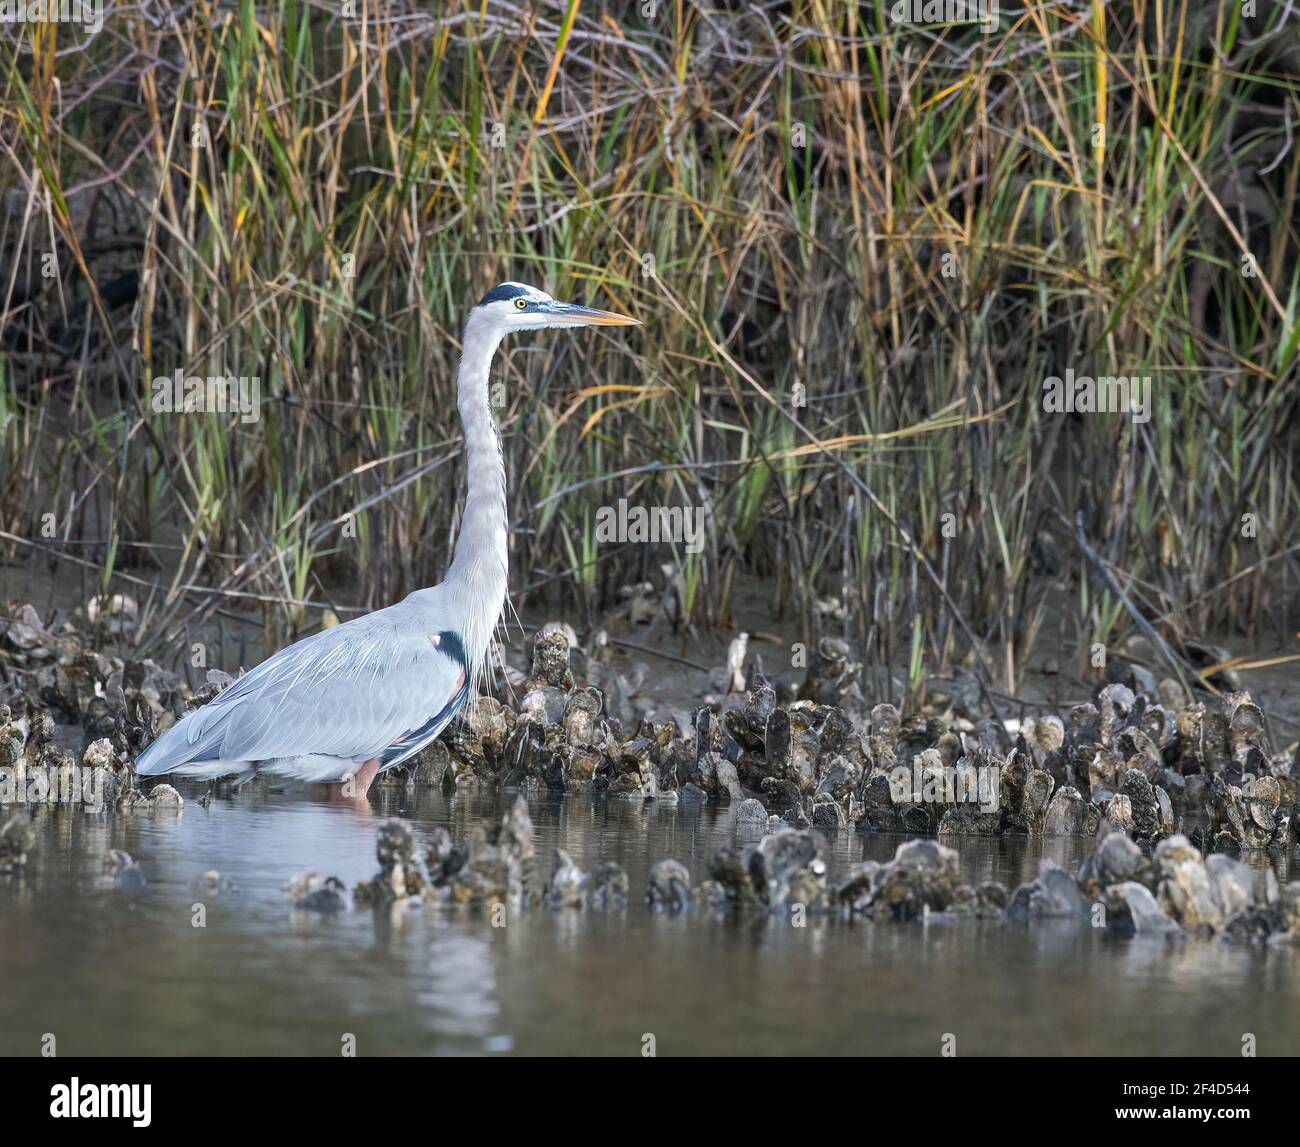 A great blue heron (Ardea herodias) standing in water at the edge of the salt marsh among oysters. Stock Photo